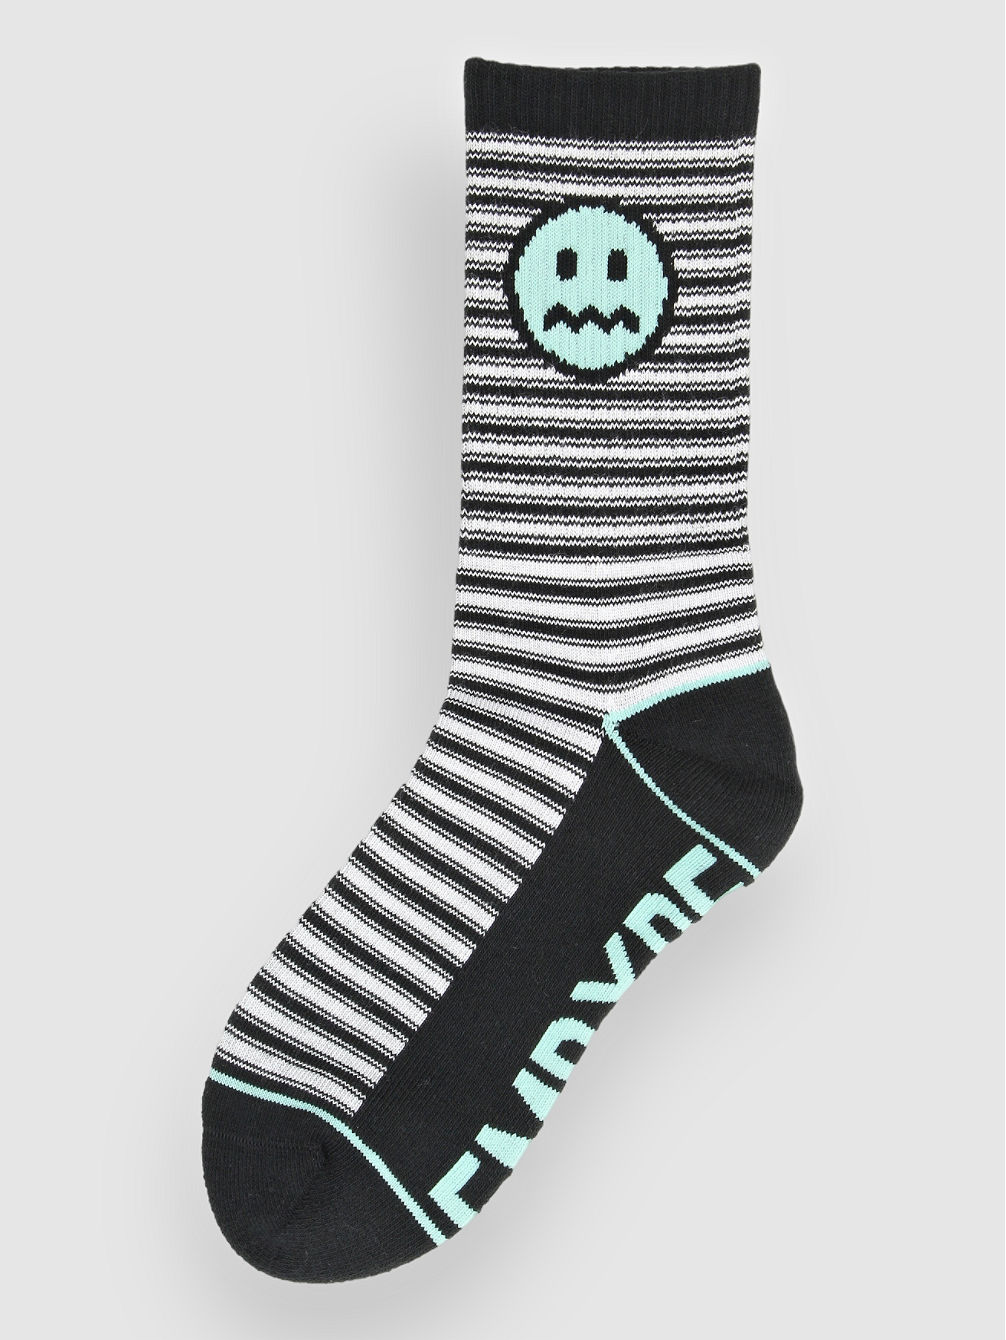 Oh Well Youth Crew Socken